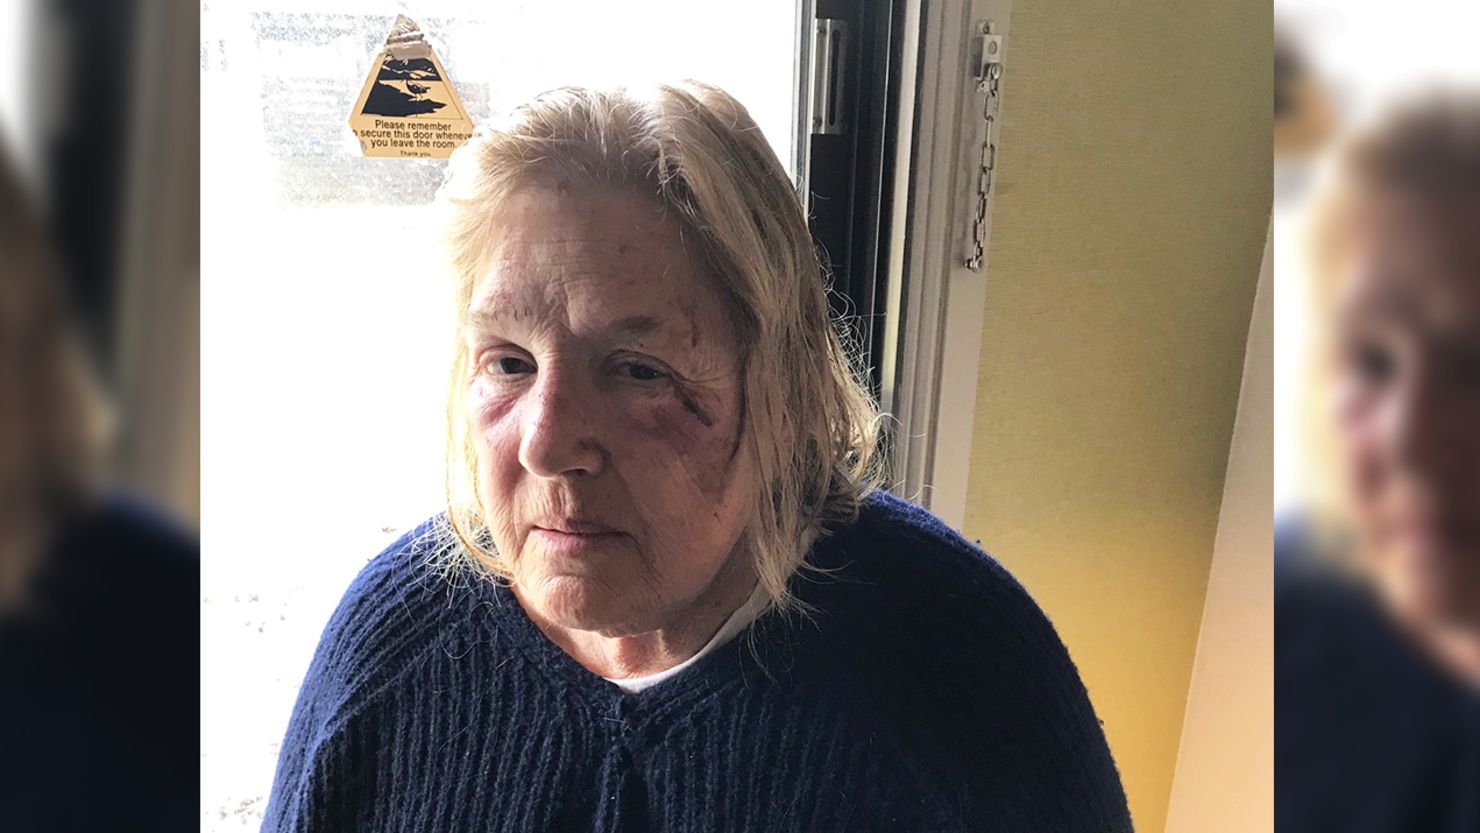 Susan Gordon suffered cuts and bruises when she was trapped in her collapsed home after a mudslide.